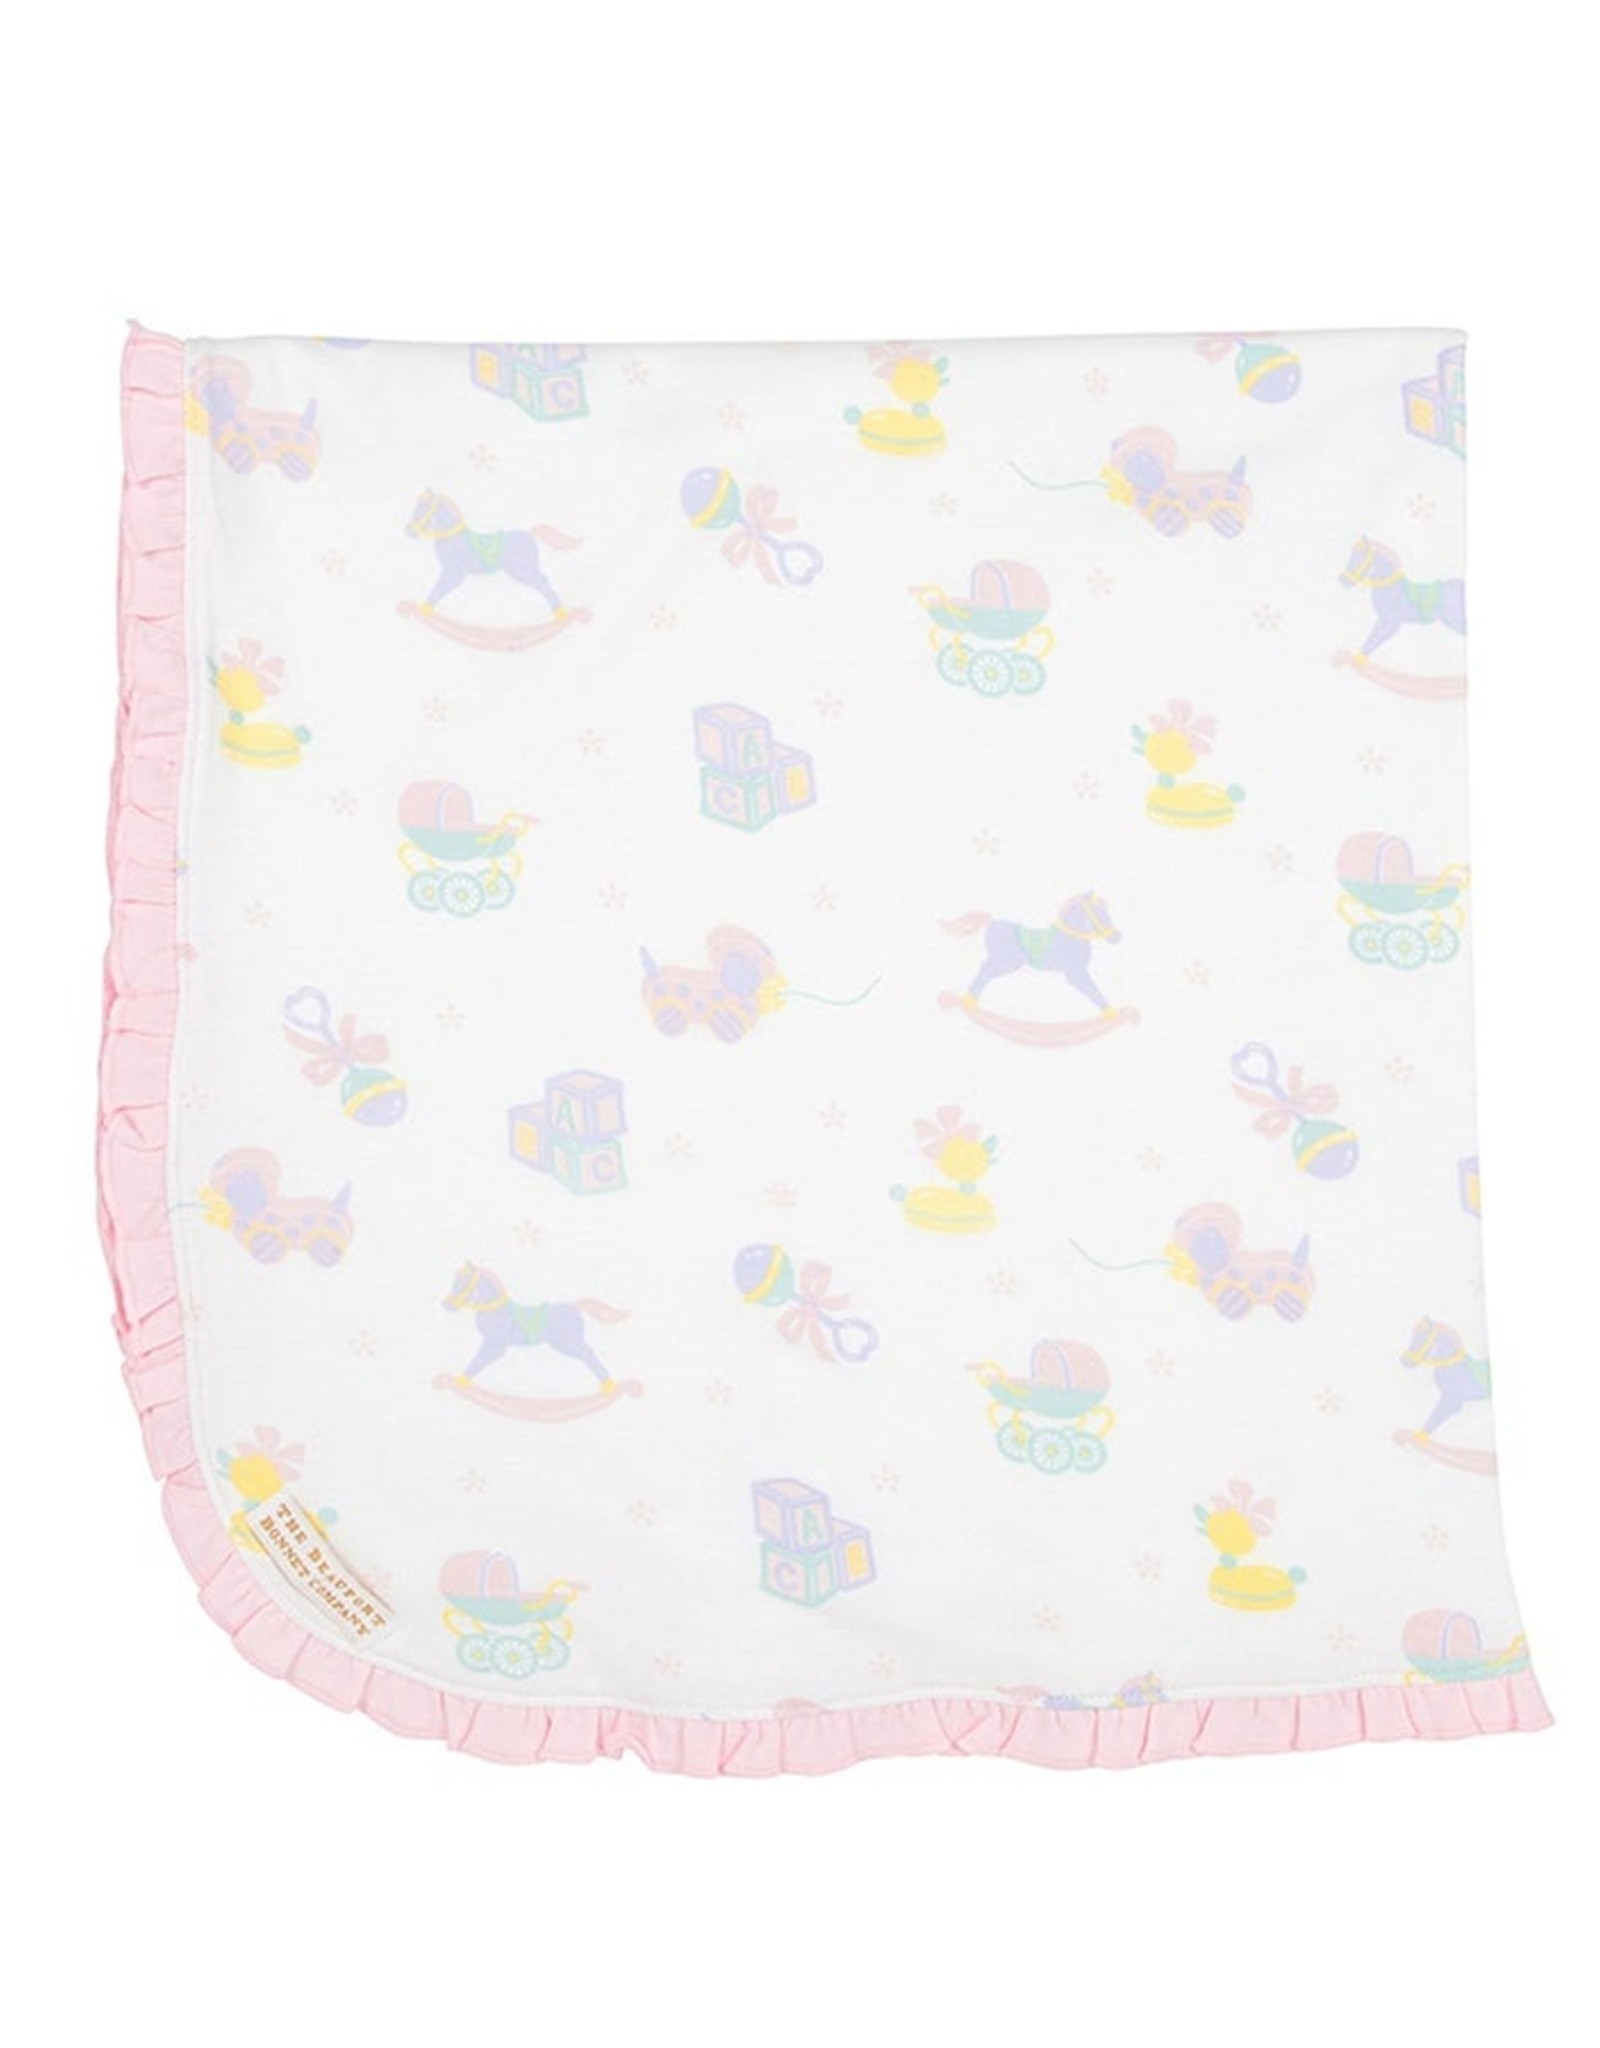 The Beaufort Bonnet Company Baby Buggy Blanket, Something For Baby Pink